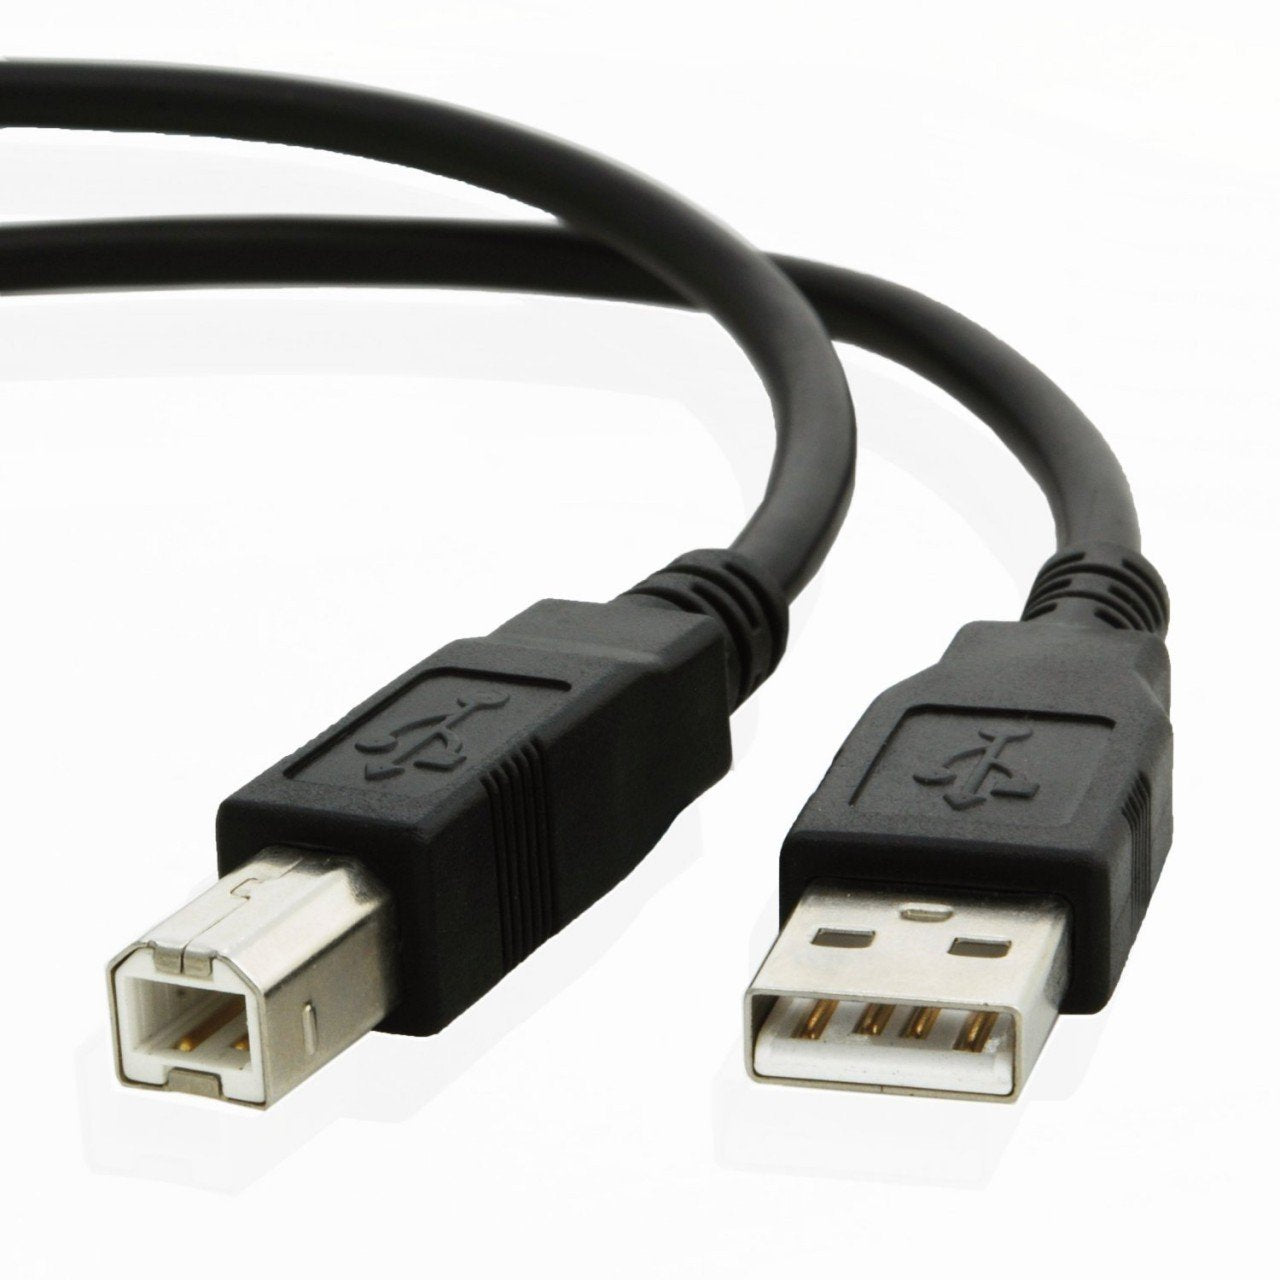 USB cable for Canon ISENSYS LBP7100Cn